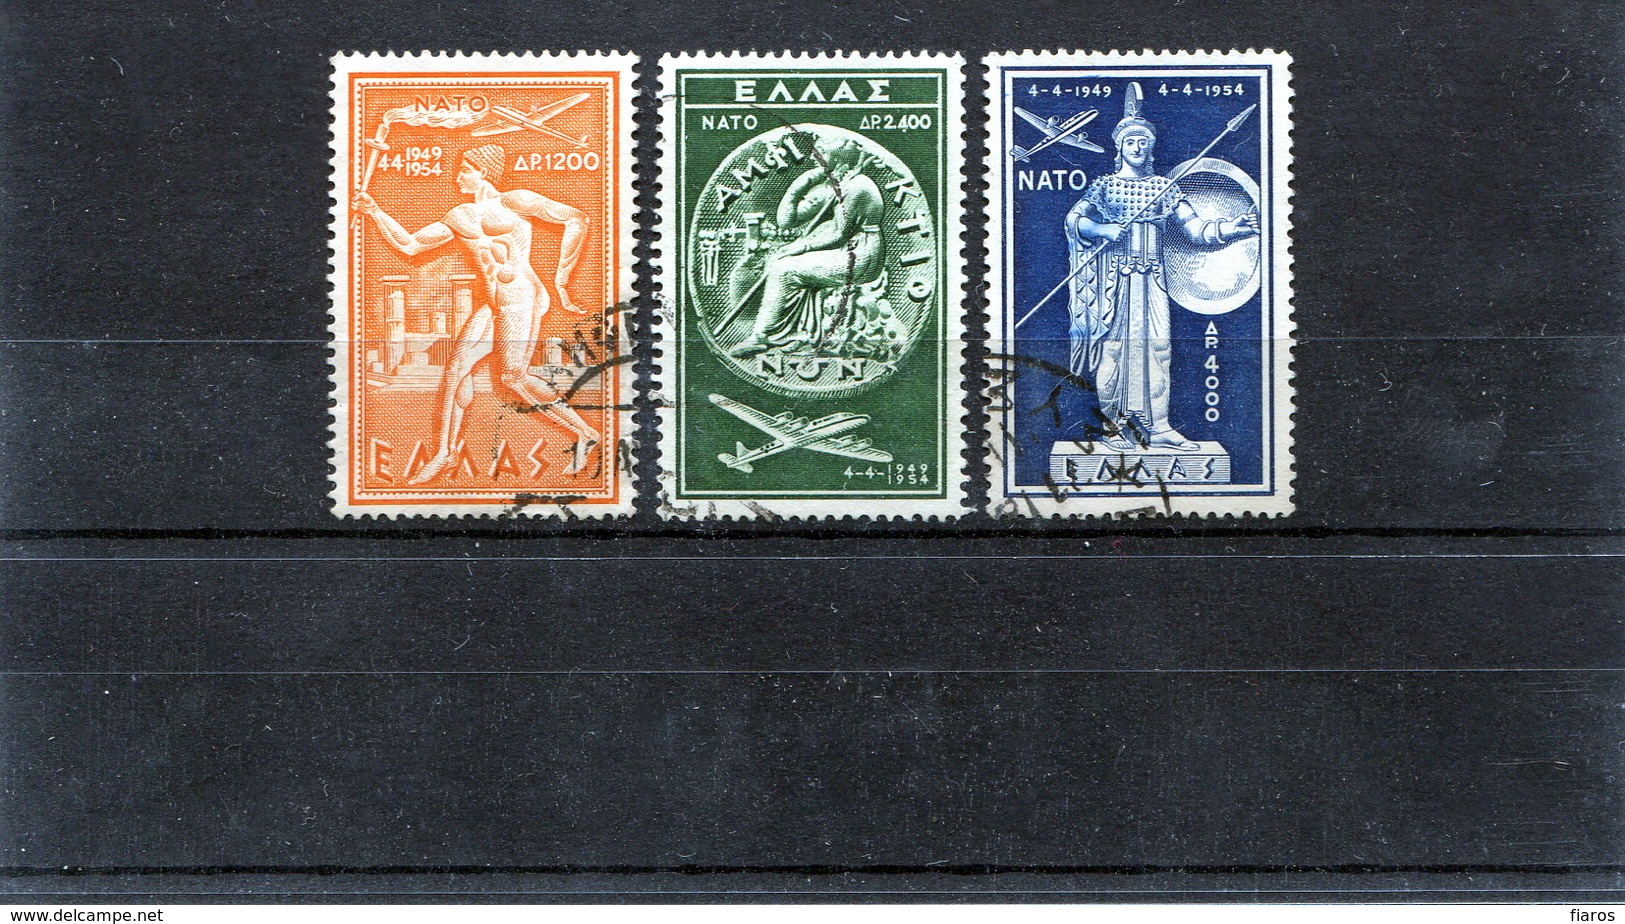 1954-Greece- "N.A.T.O." Airpost Issue- Complete Set Used - Used Stamps